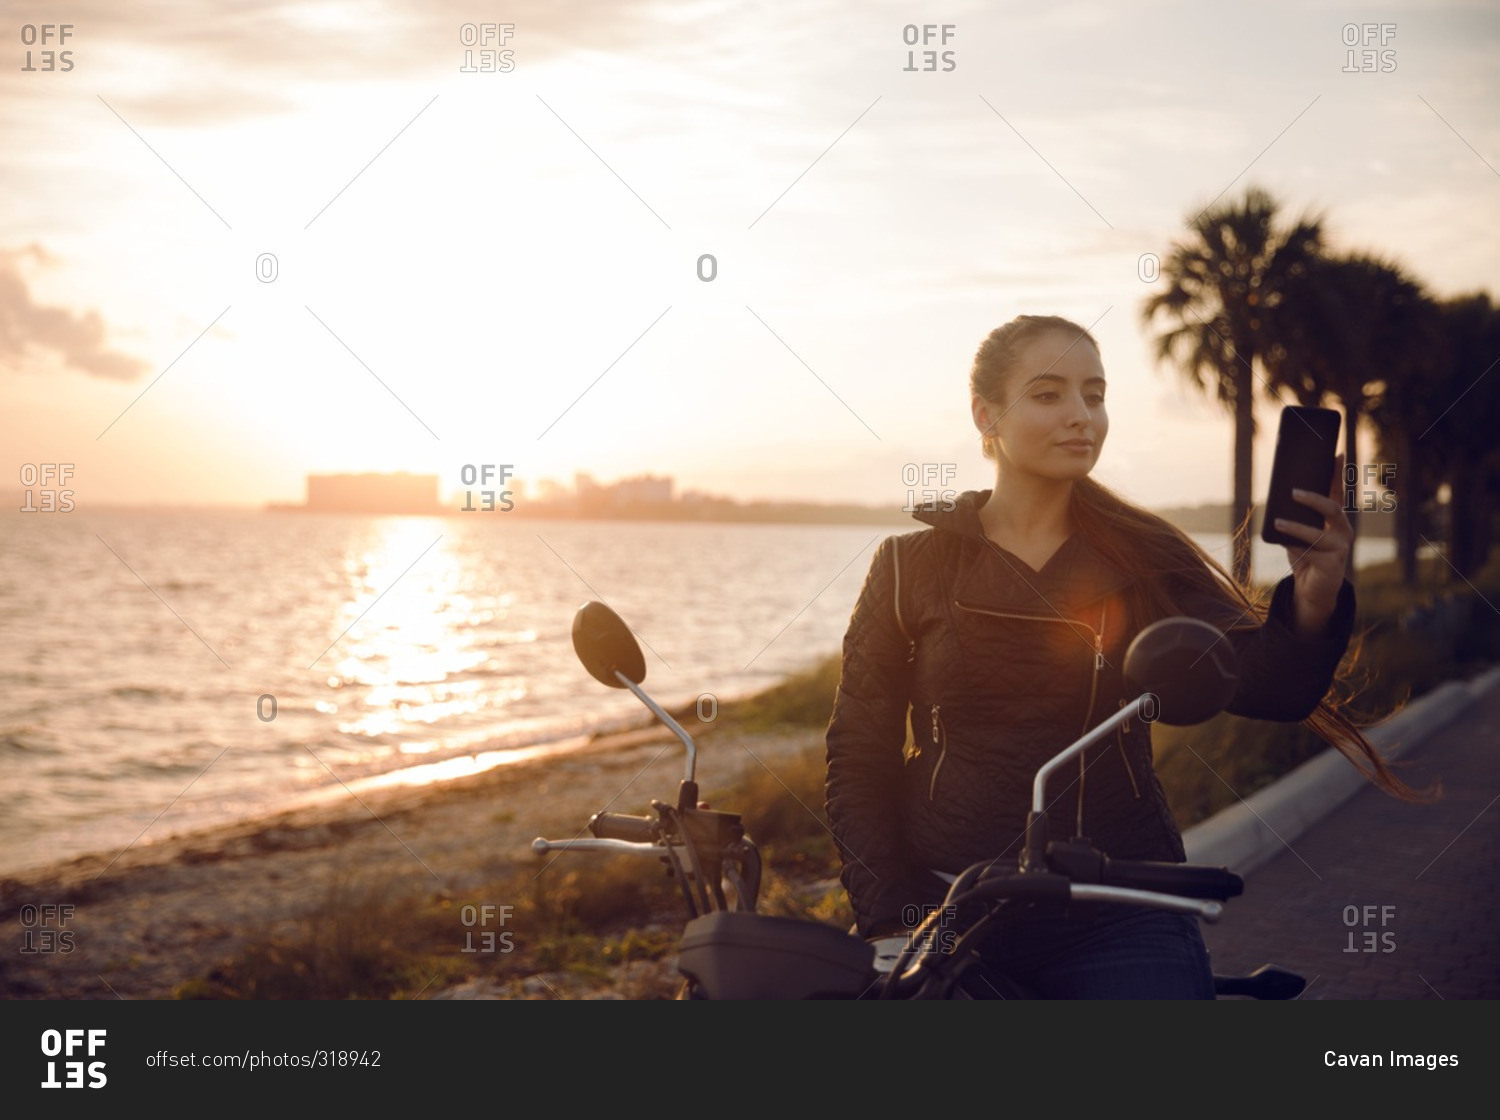 Woman by motorcycle holding smartphone